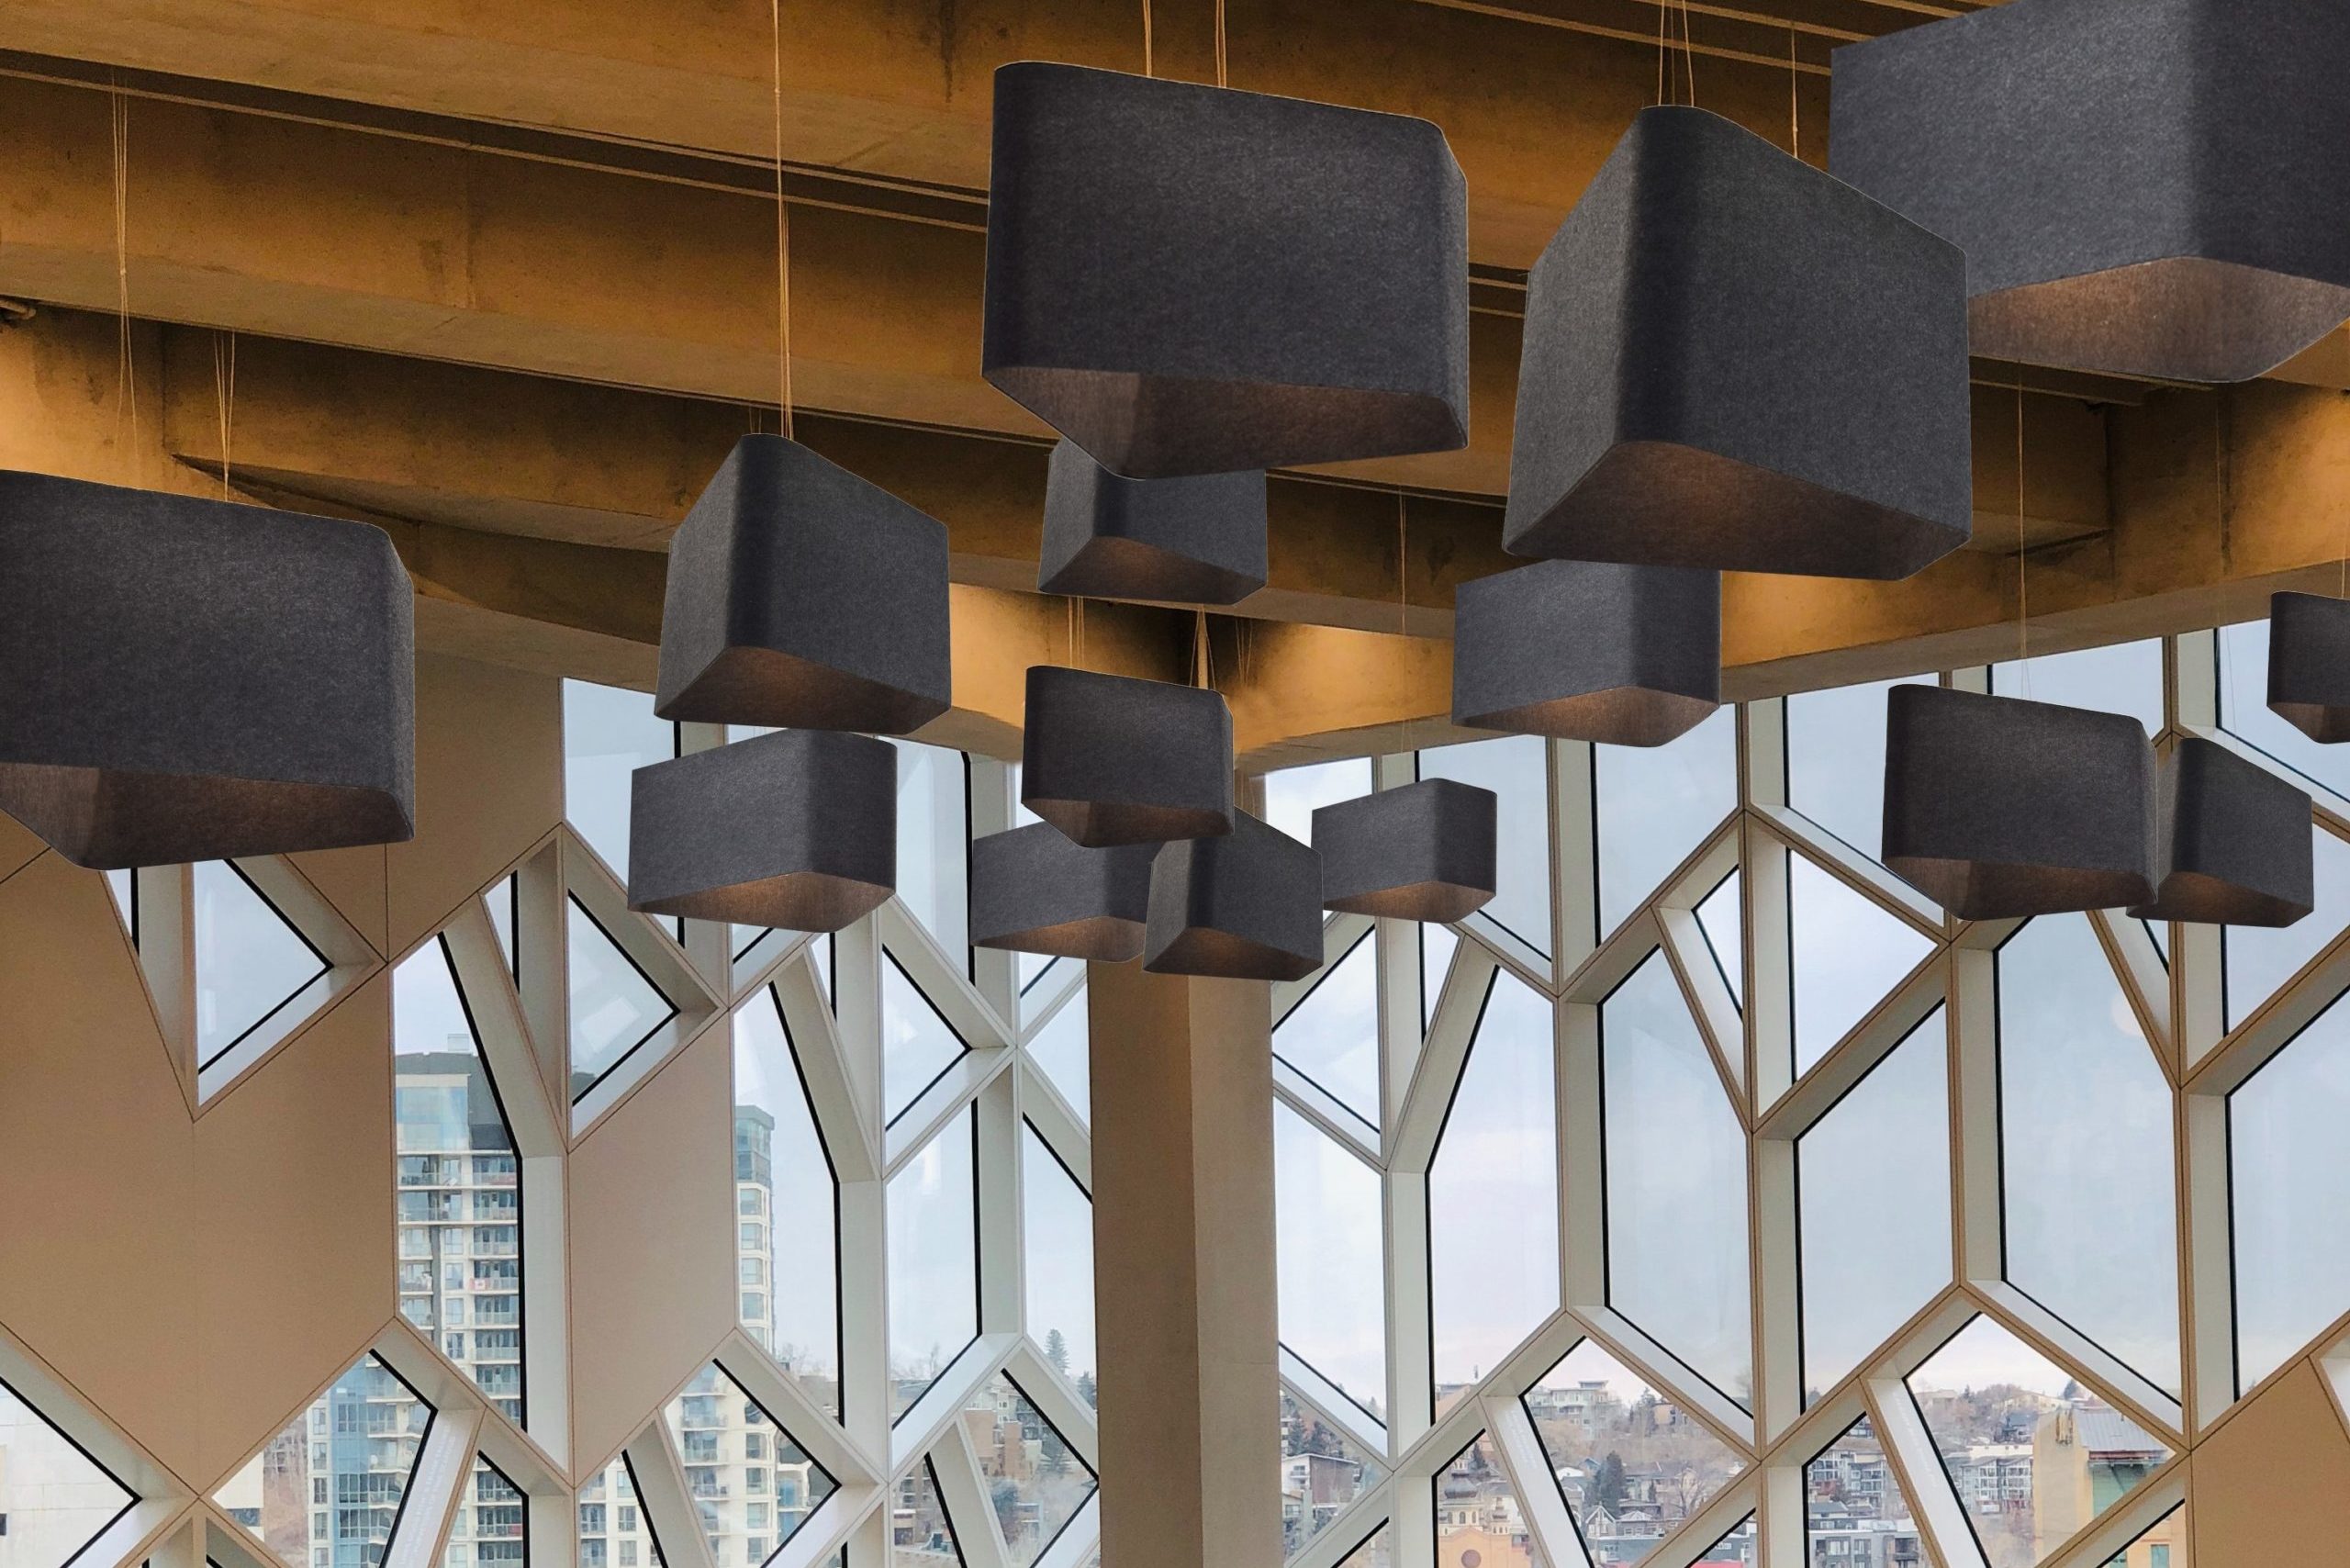 Acoustical lighting